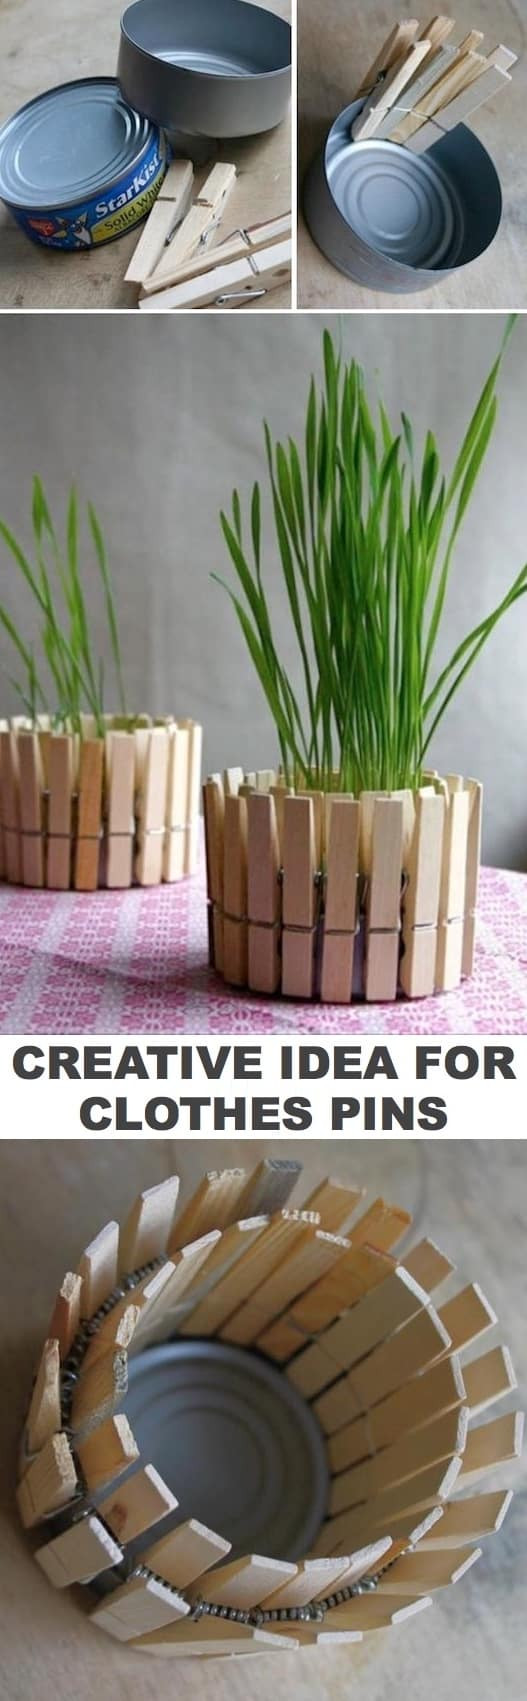 Simple Craft For Adults
 Easy DIY Craft Ideas That Will Spark Your Creativity for